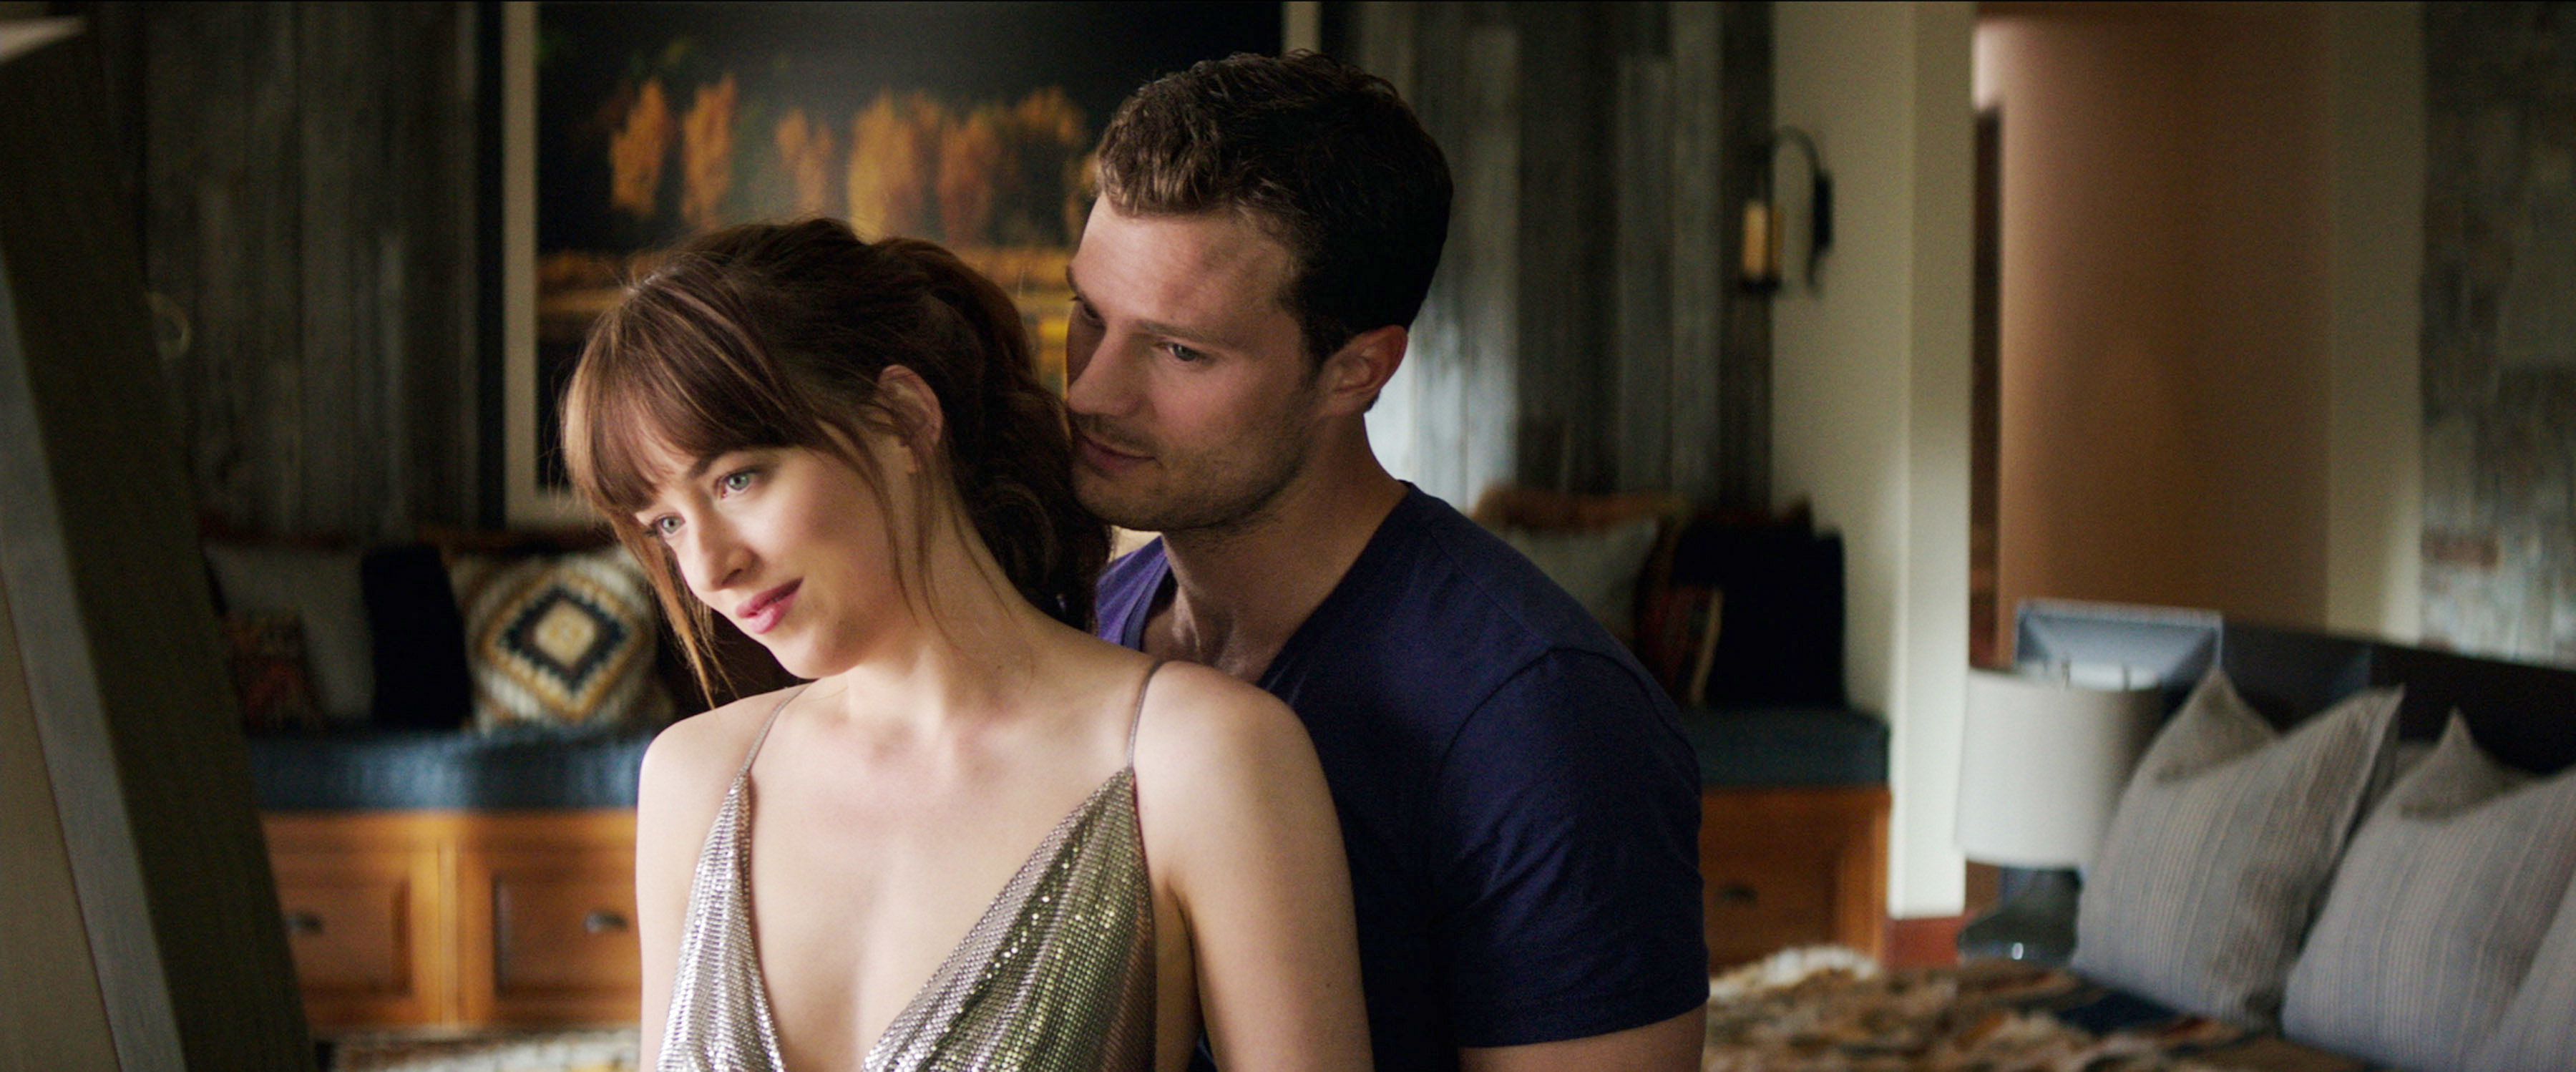 Jamie holding Dakota from behind in a scene from &quot;Fifty Shades of Grey&quot;